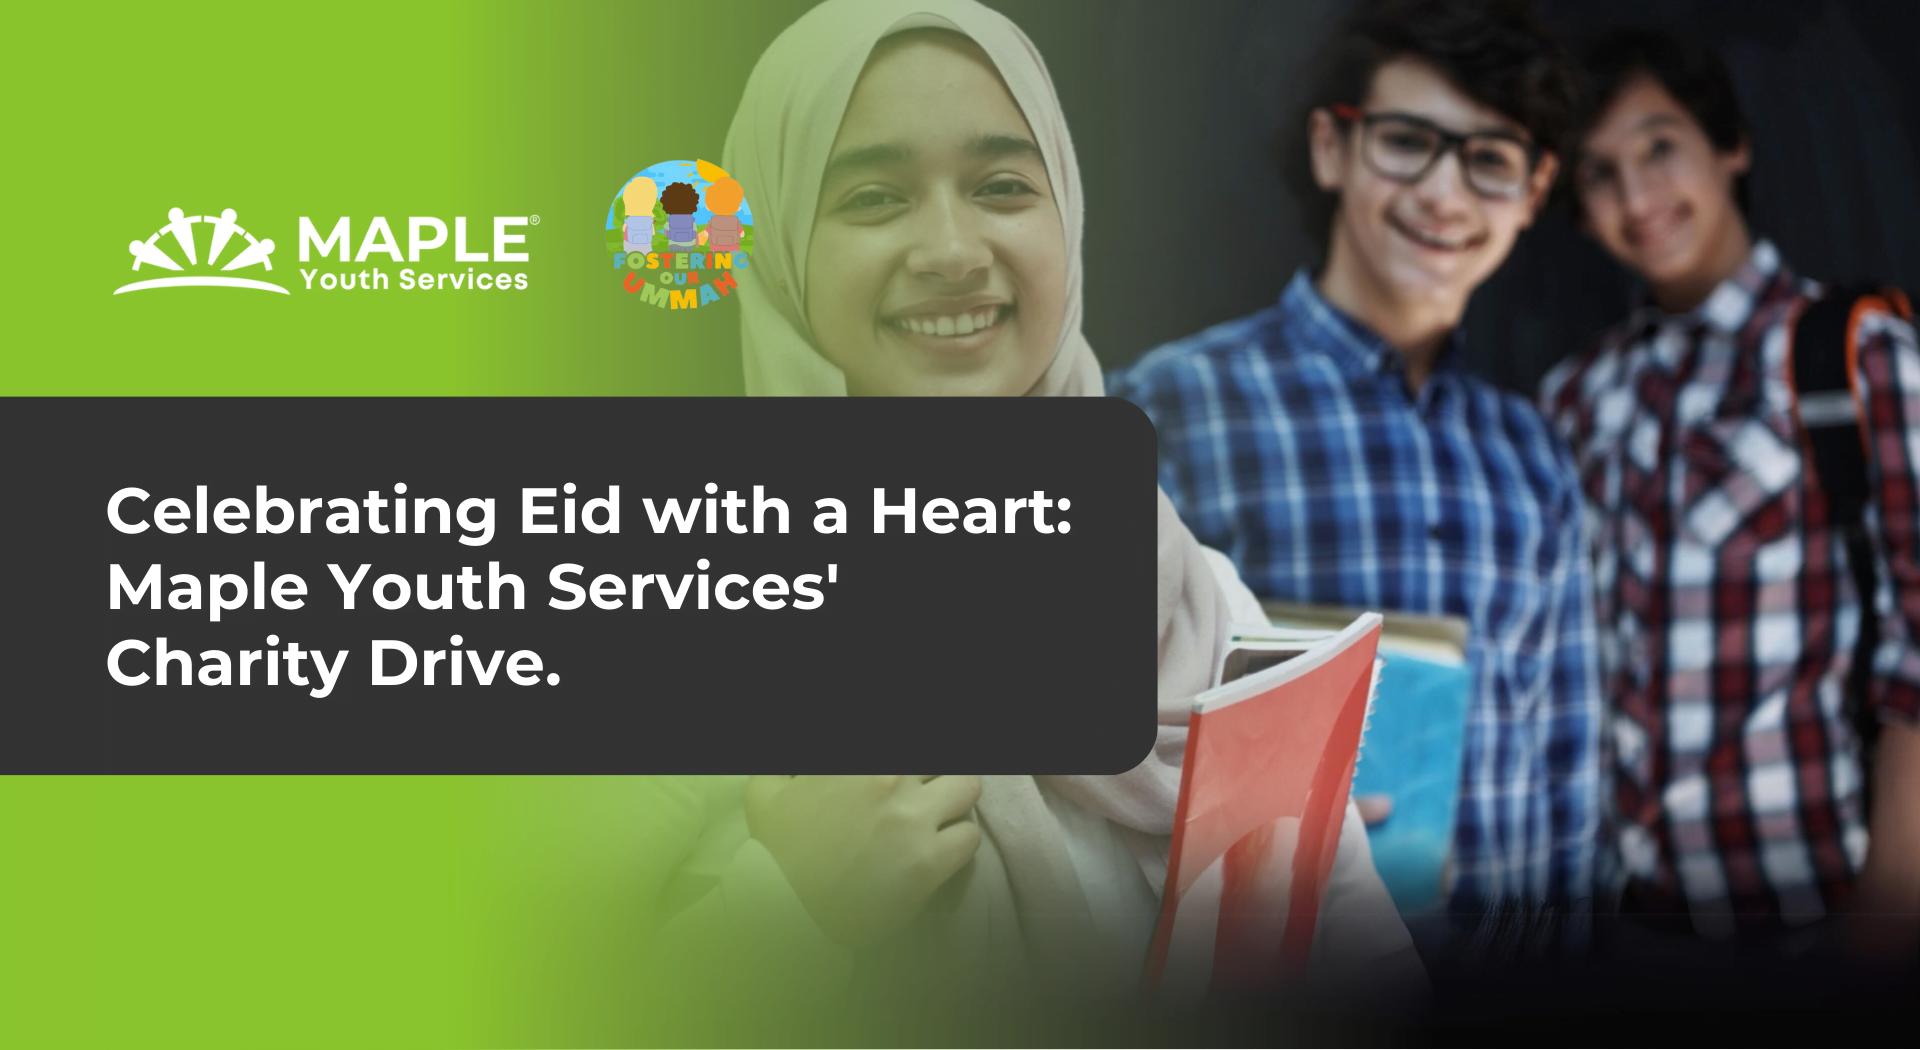 Celebrating Eid with a Heart: Maple Youth Services’ Charity Drive